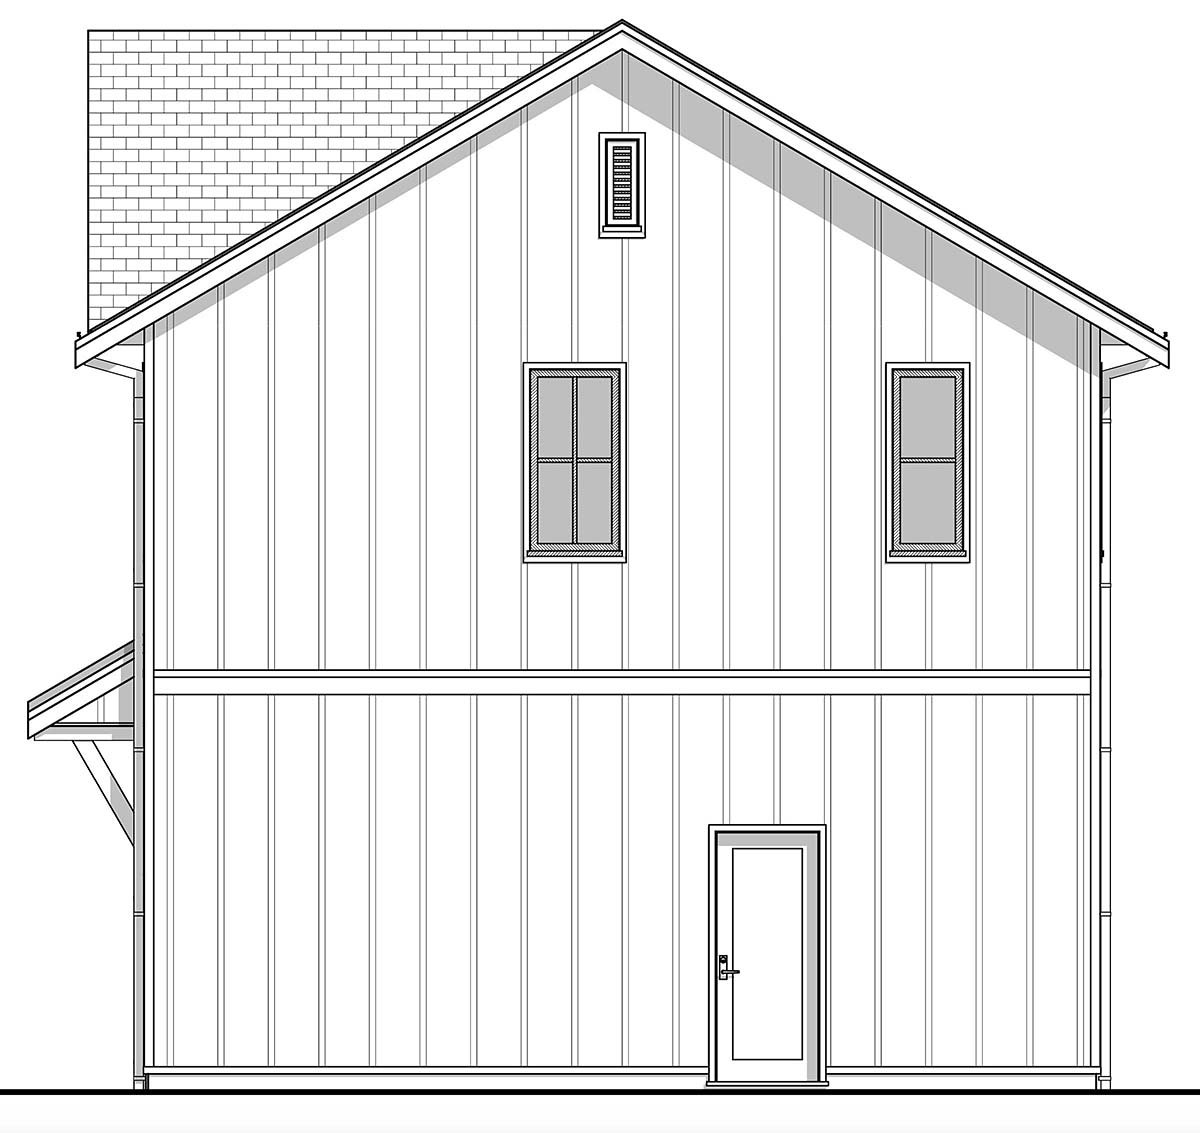 Cottage, Country, Farmhouse, New American Style, Traditional Plan with 899 Sq. Ft., 2 Bedrooms, 2 Bathrooms, 3 Car Garage Picture 6